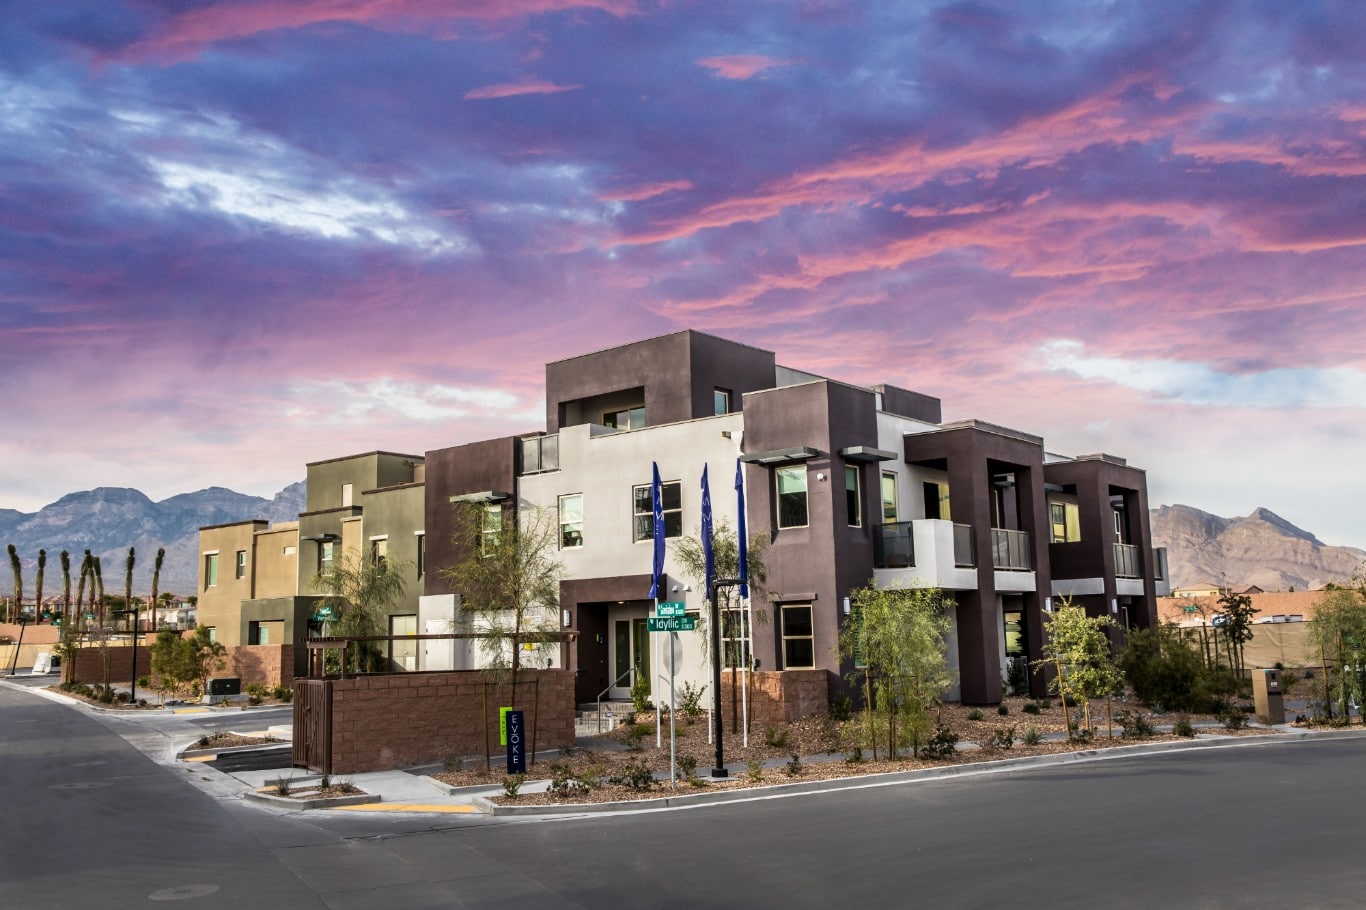 Consider townhomes for affordable homeownership in Las Vegas Valley, where 29.1% of new-home sales are townhomes. Learn about this growing trend and how it can benefit you. Contact the Smith King Team at 702-212-2099 for all your housing needs.